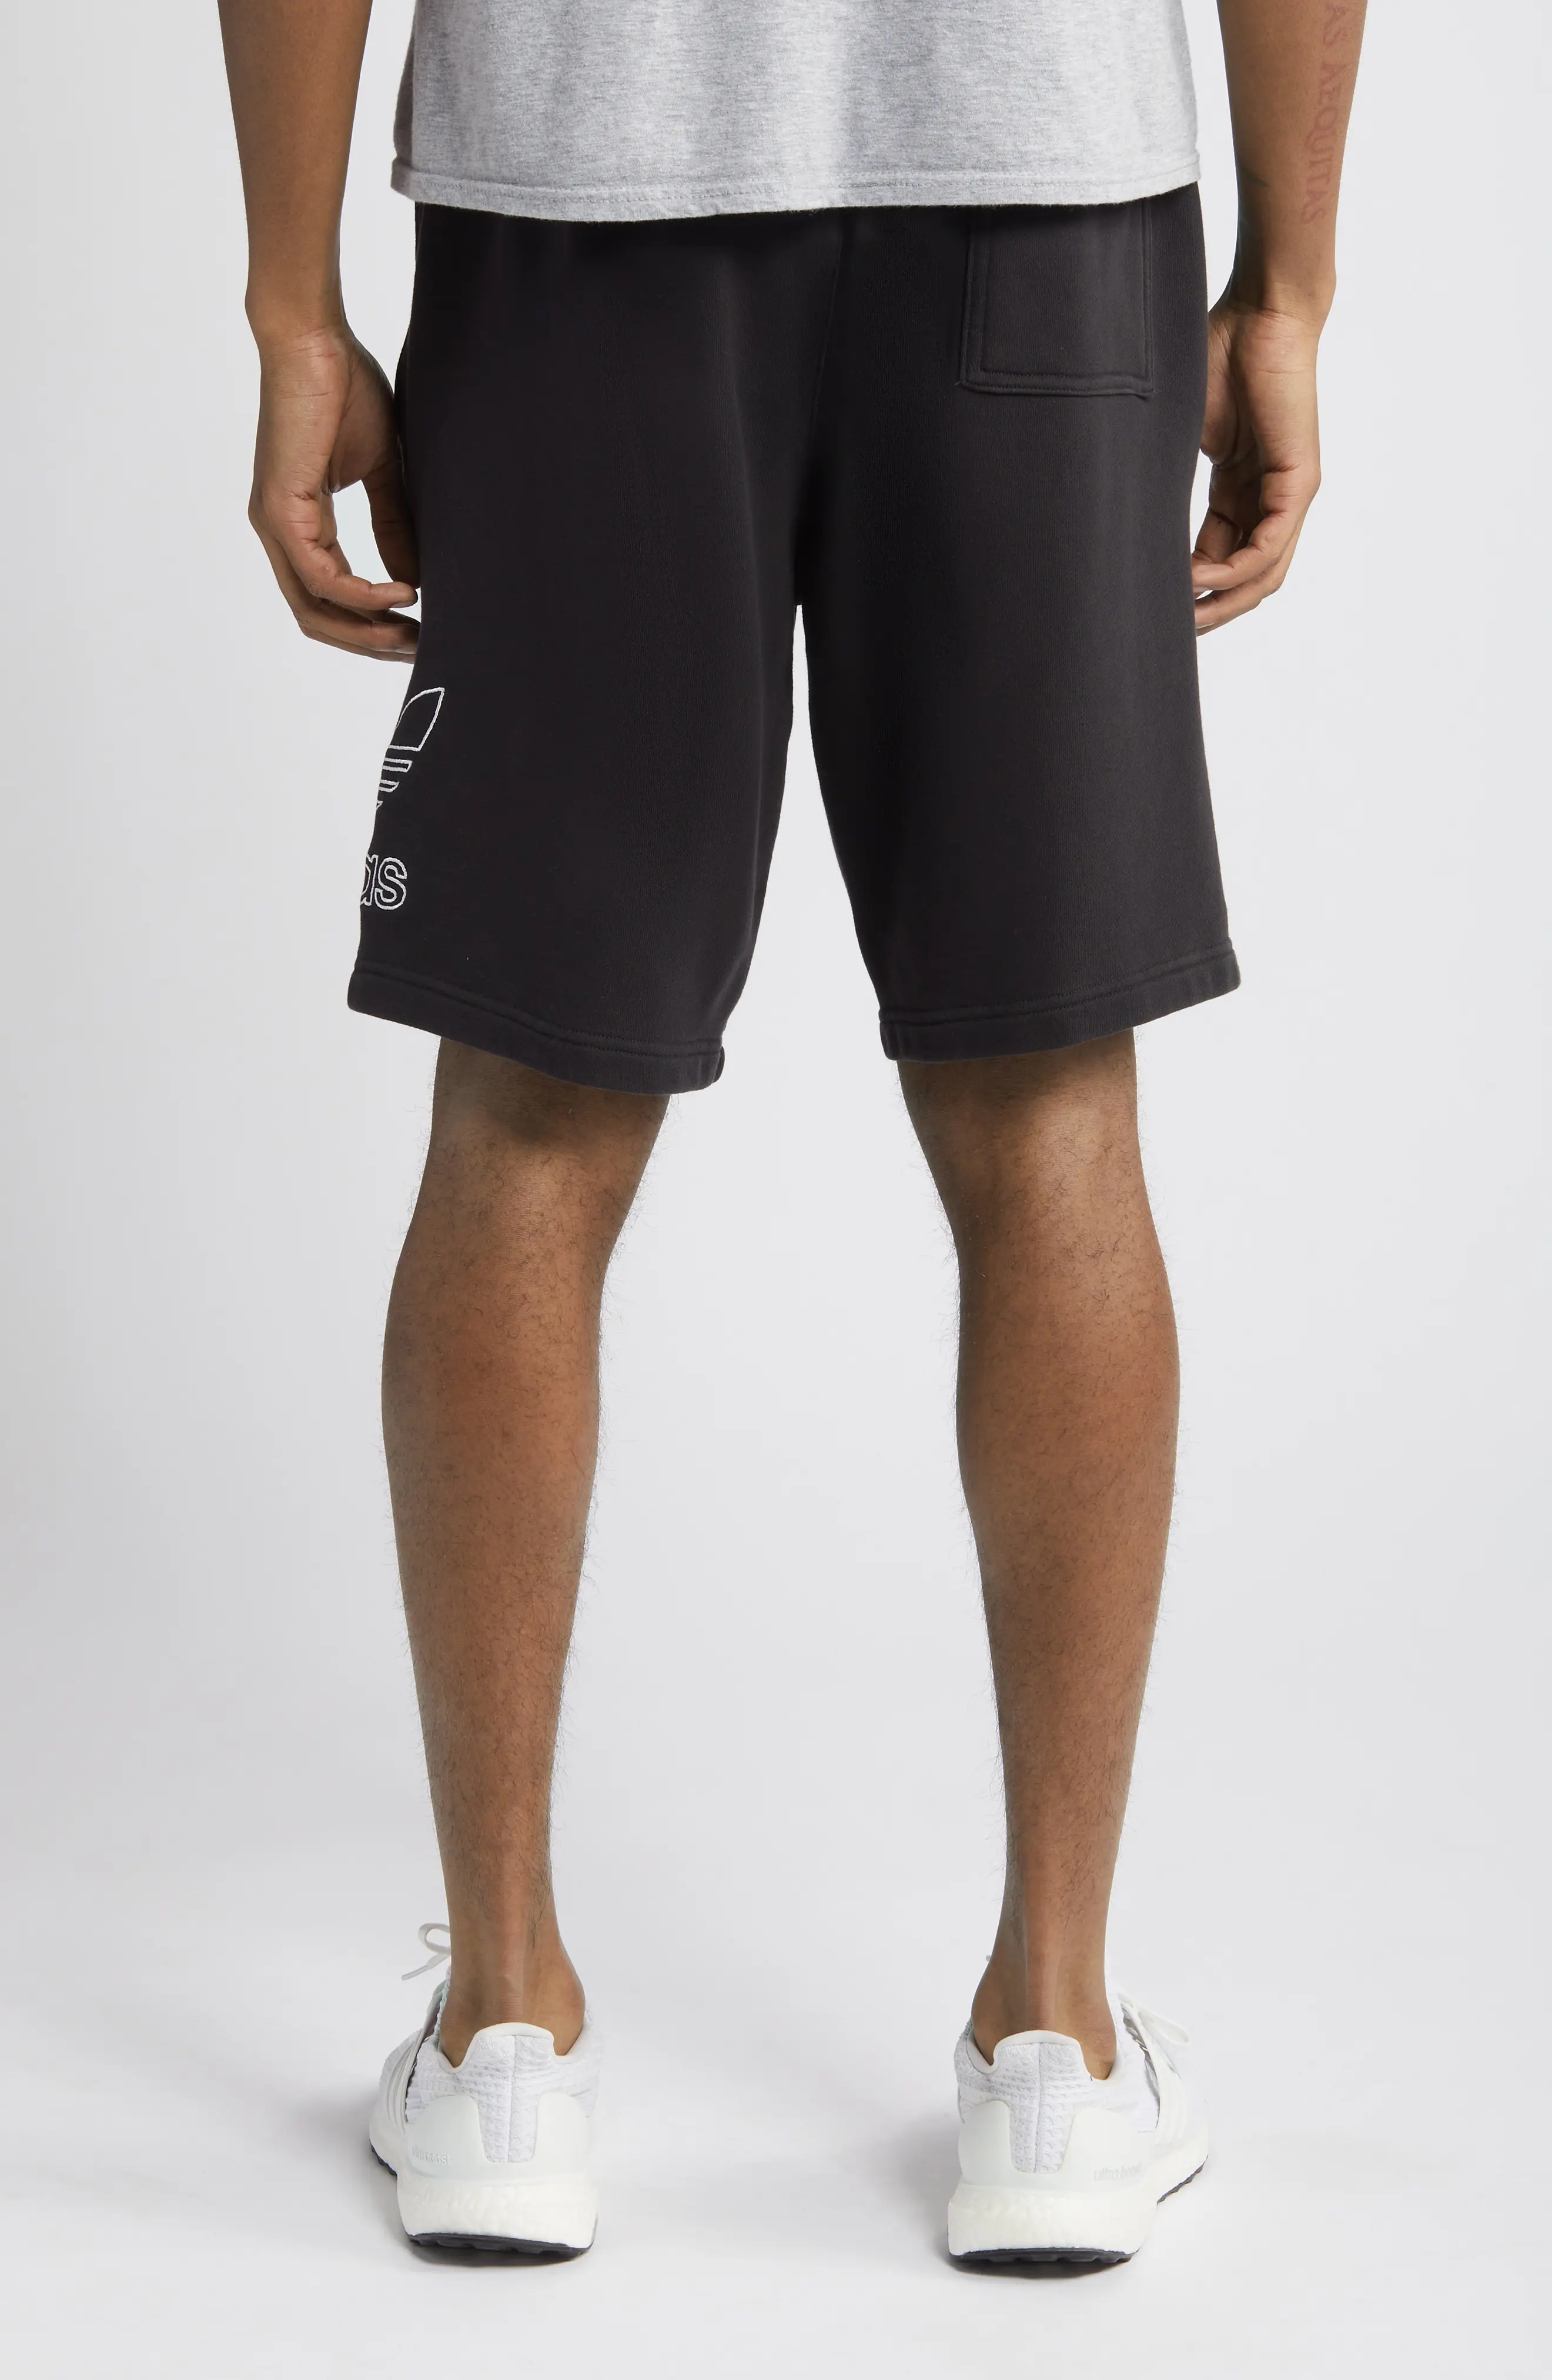 Trefoil Embroidered Sweat Shorts in Black/White - 2